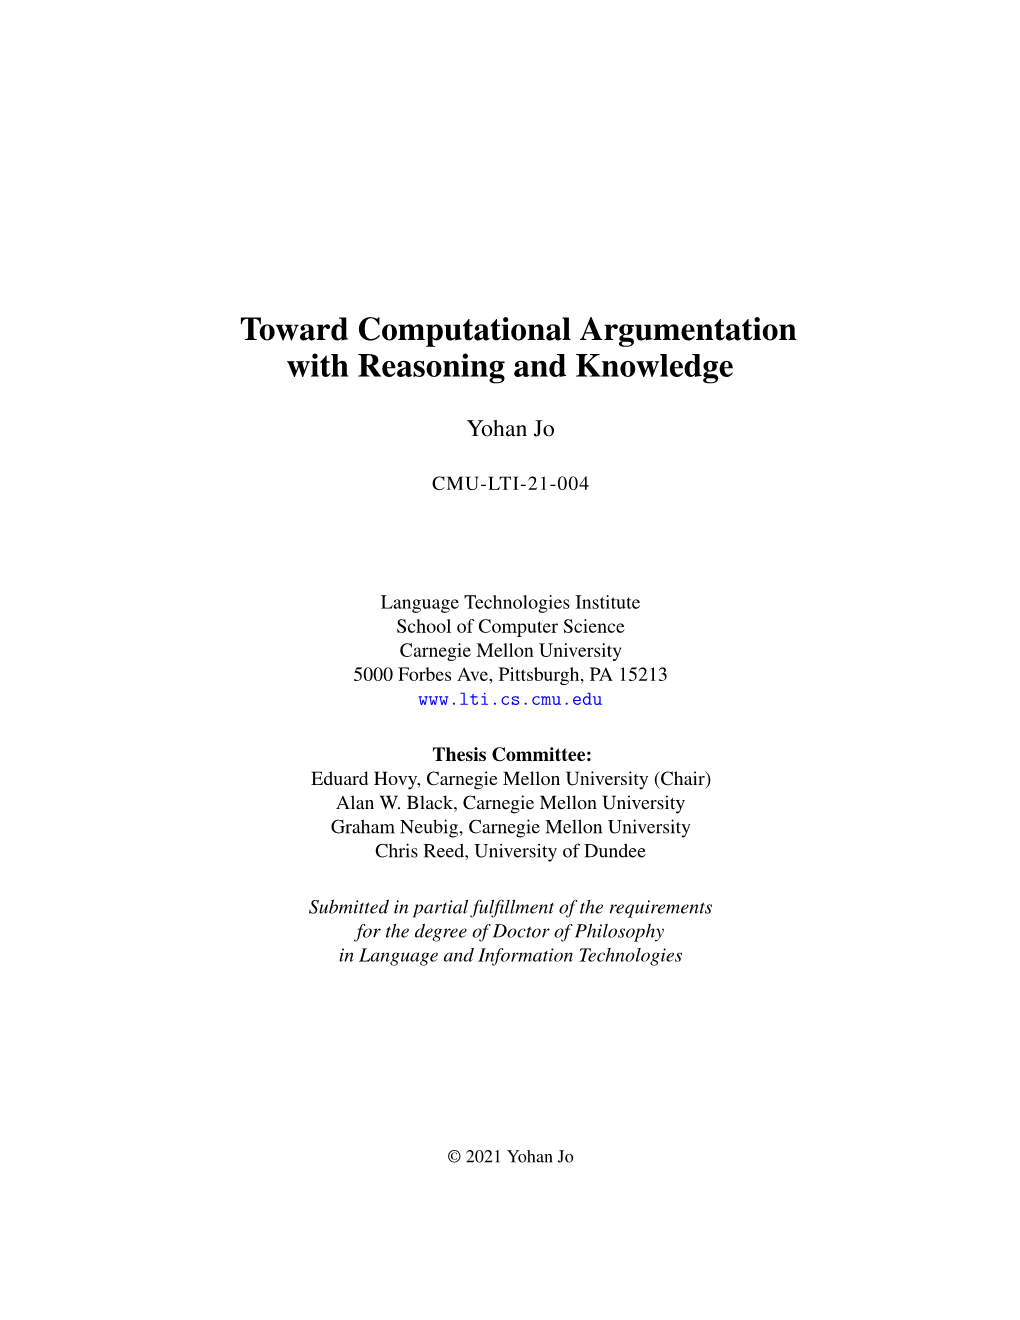 Toward Computational Argumentation with Reasoning and Knowledge